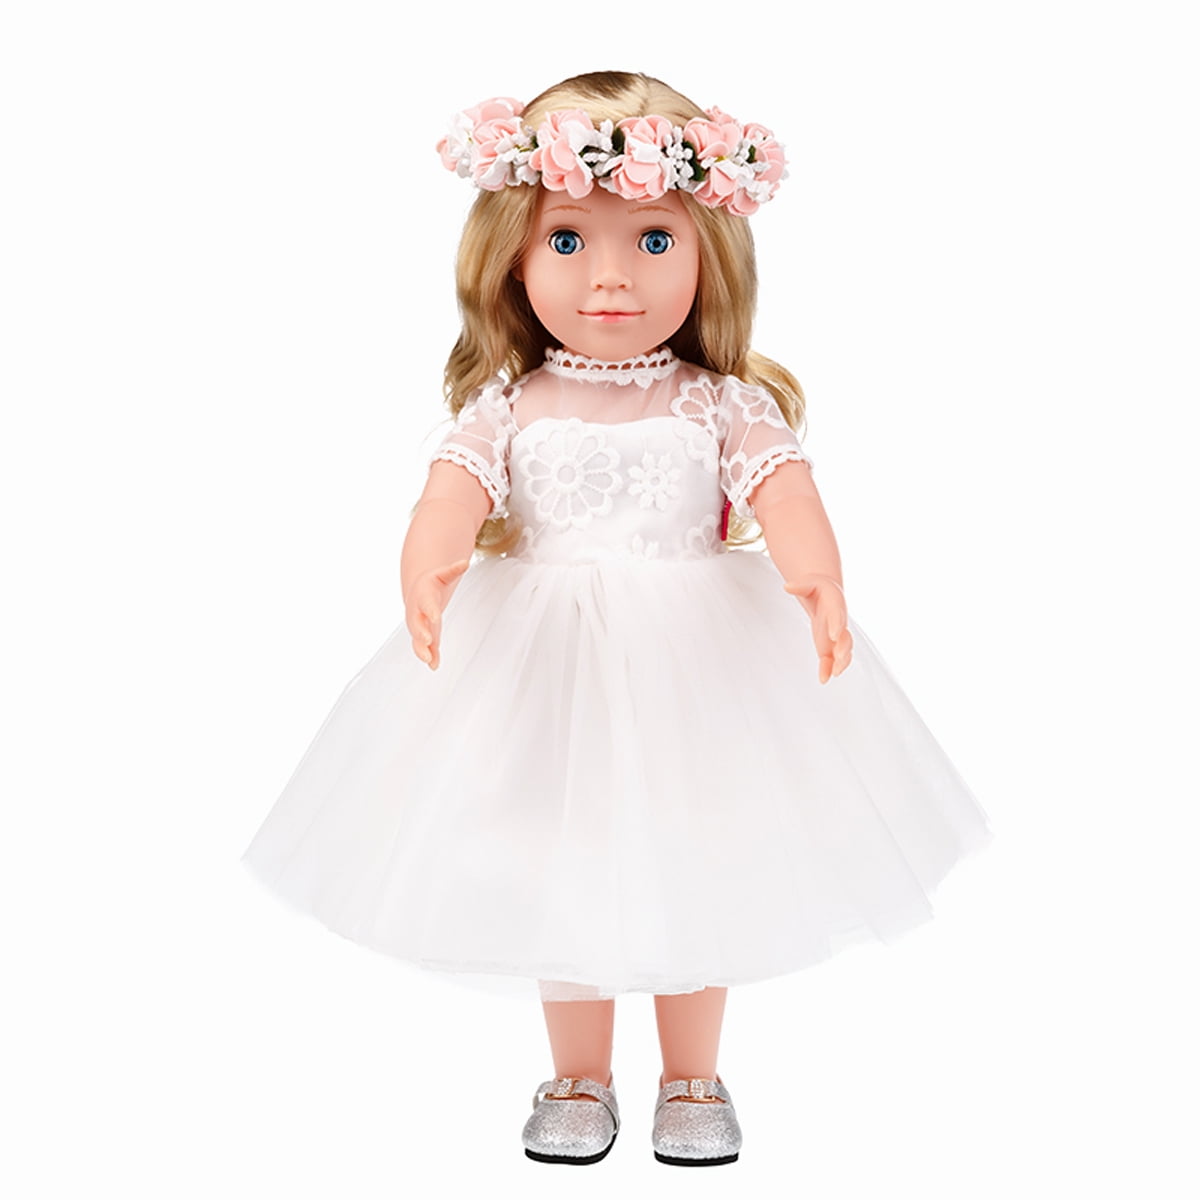 Details about   18 inch doll clothes that will fit American Girl Doll or My Life Doll homemade 